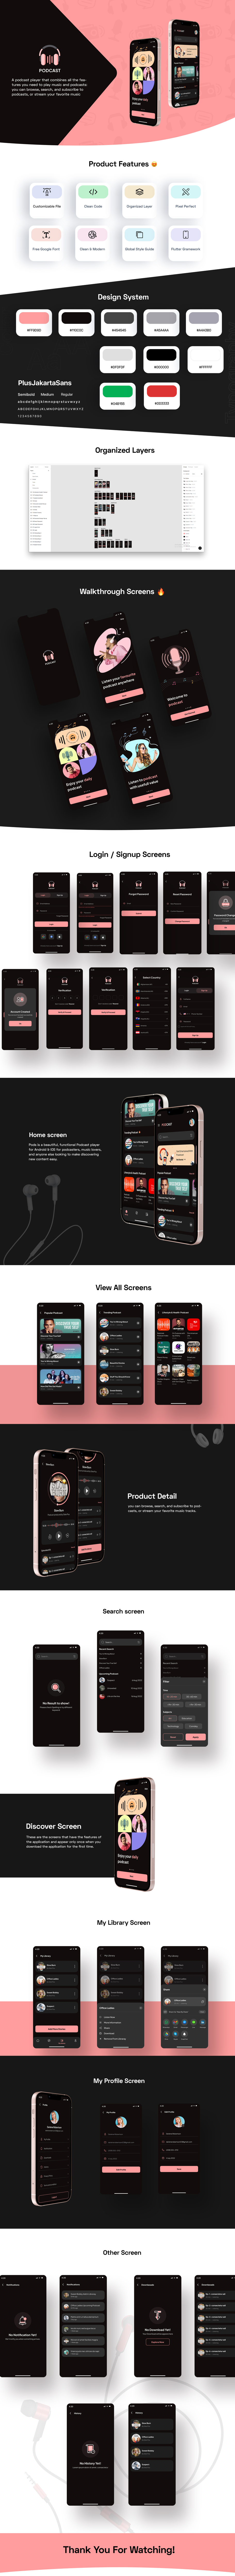 Pods- Podcast Player & Music Streaming flutter 3.3 app(Android, iOS) UI template - 6